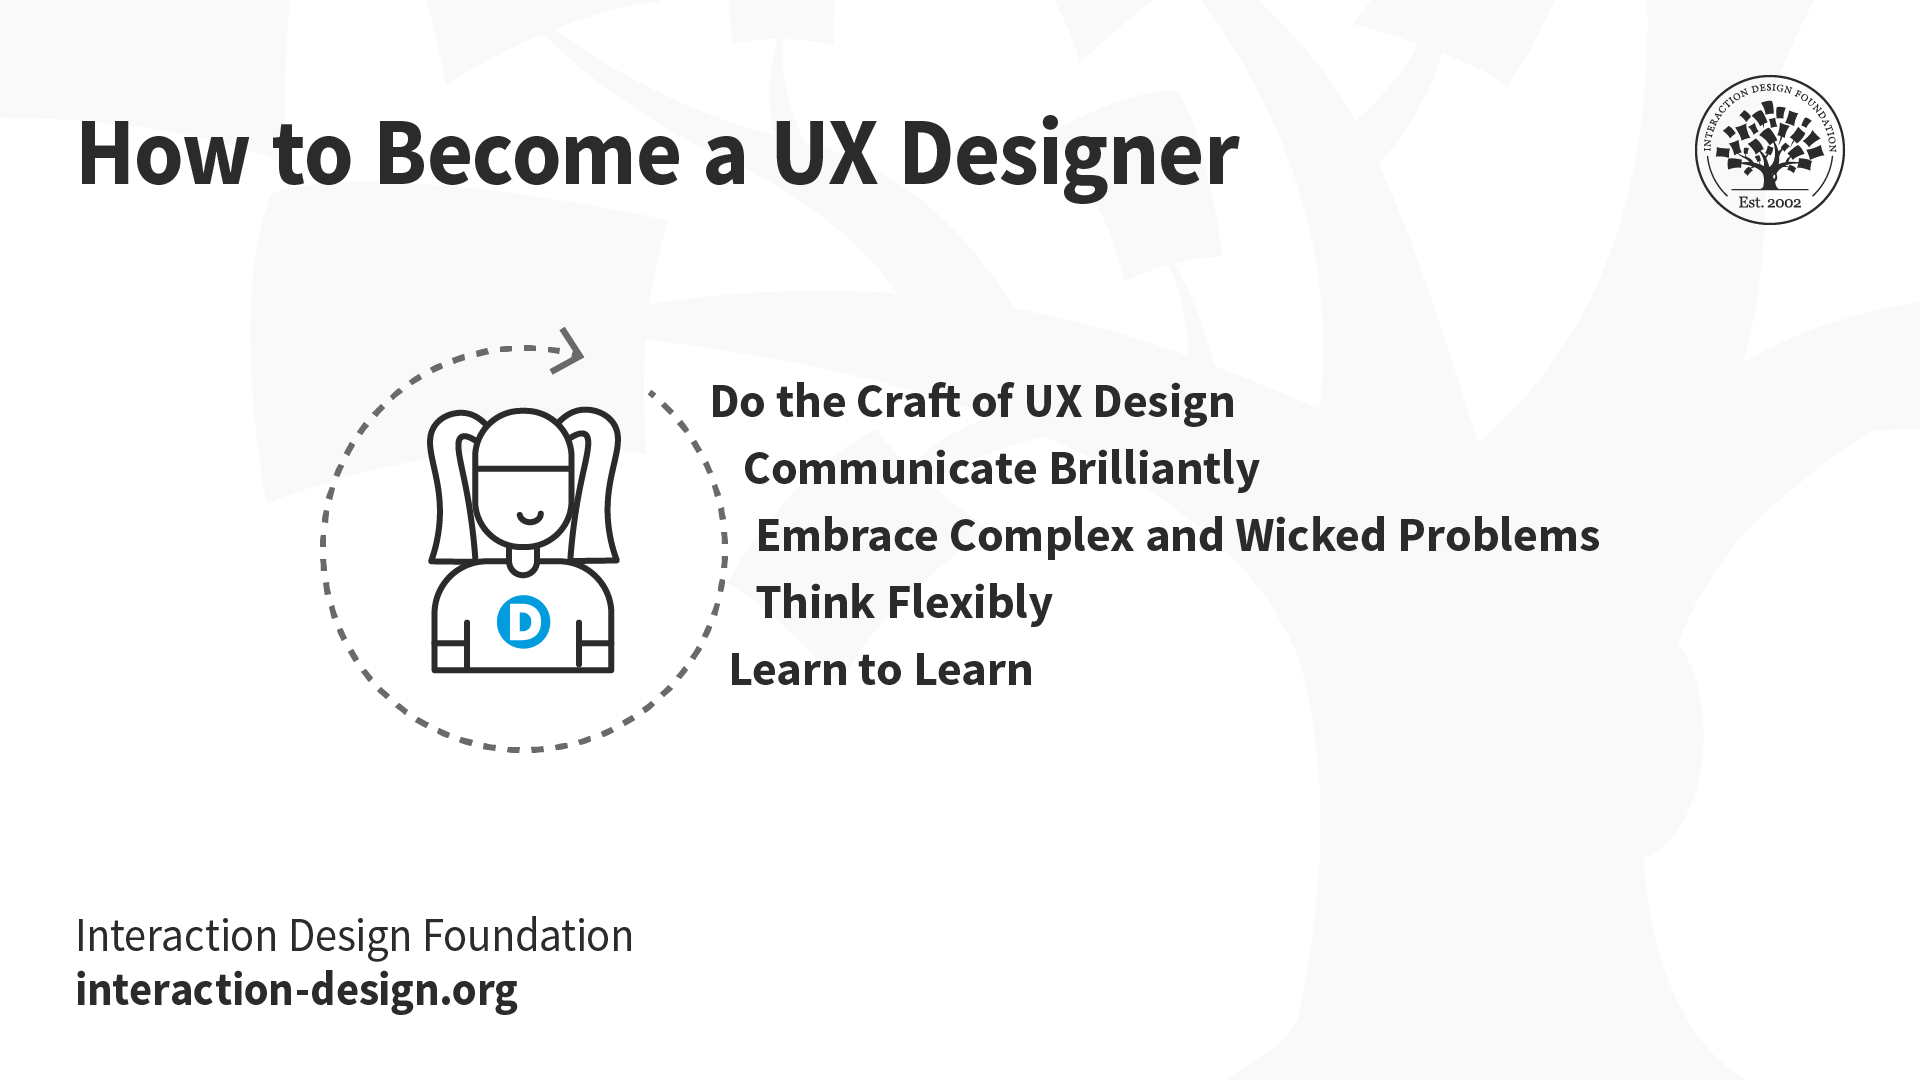 1. Do the Craft of UX Design. 2. Communicate Brilliantly. 3. Embrace Complex and Wicked Problems. 4. Think Flexibly. 5. Learn to Learn.